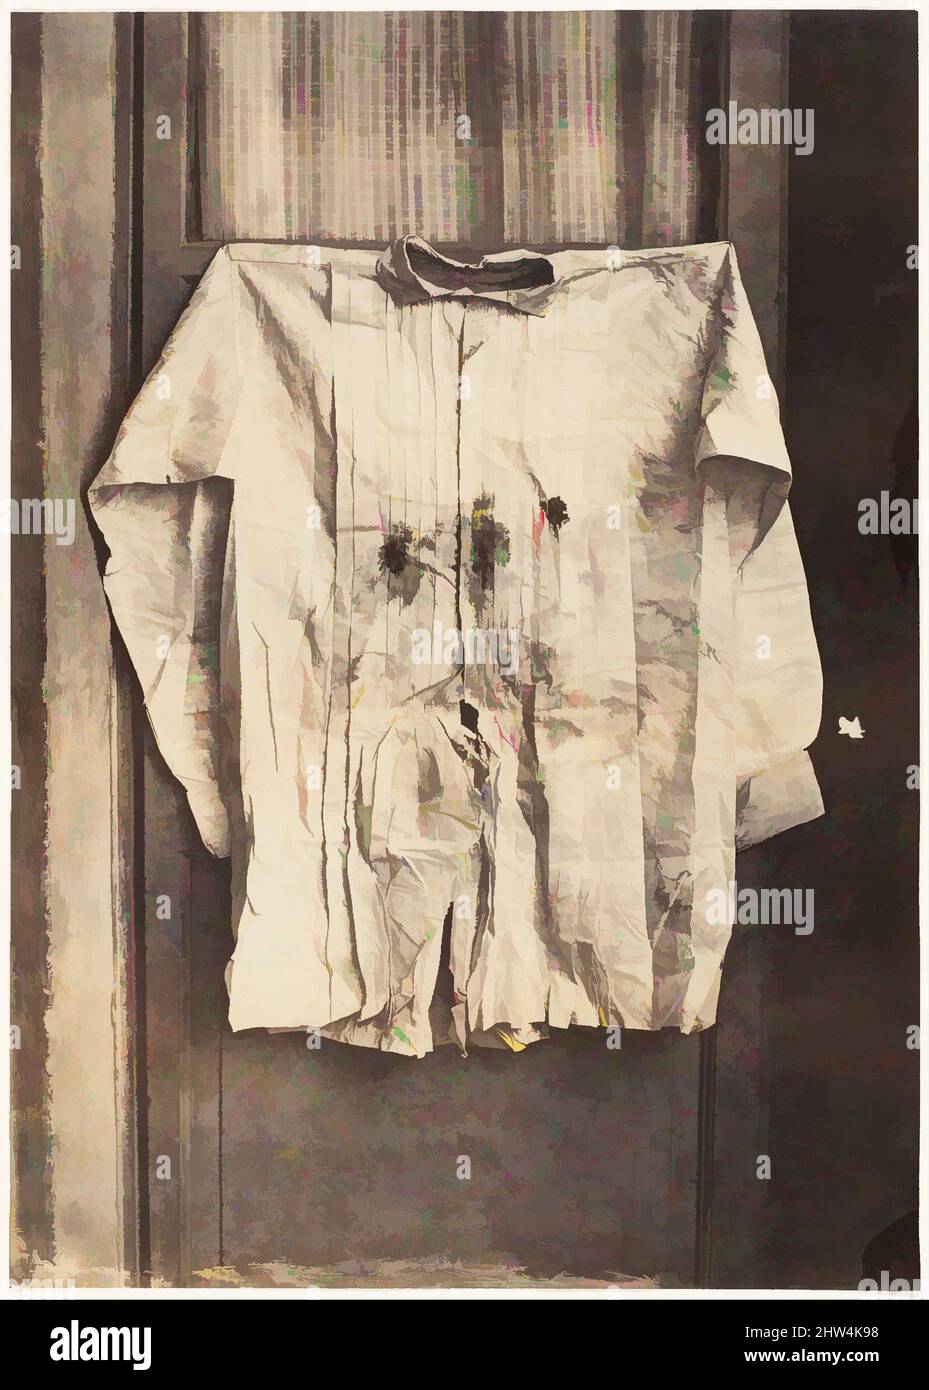 Art inspired by The Shirt of the Emperor, Worn during His Execution, 1867, Albumen silver print from glass negative, Image: 22.2 × 15.8 cm (8 3/4 × 6 1/4 in.), Photographs, François Aubert (French, 1829–1906), This grisly photograph depicts the bullet-riddled shirt of the Austrian, Classic works modernized by Artotop with a splash of modernity. Shapes, color and value, eye-catching visual impact on art. Emotions through freedom of artworks in a contemporary way. A timeless message pursuing a wildly creative new direction. Artists turning to the digital medium and creating the Artotop NFT Stock Photo